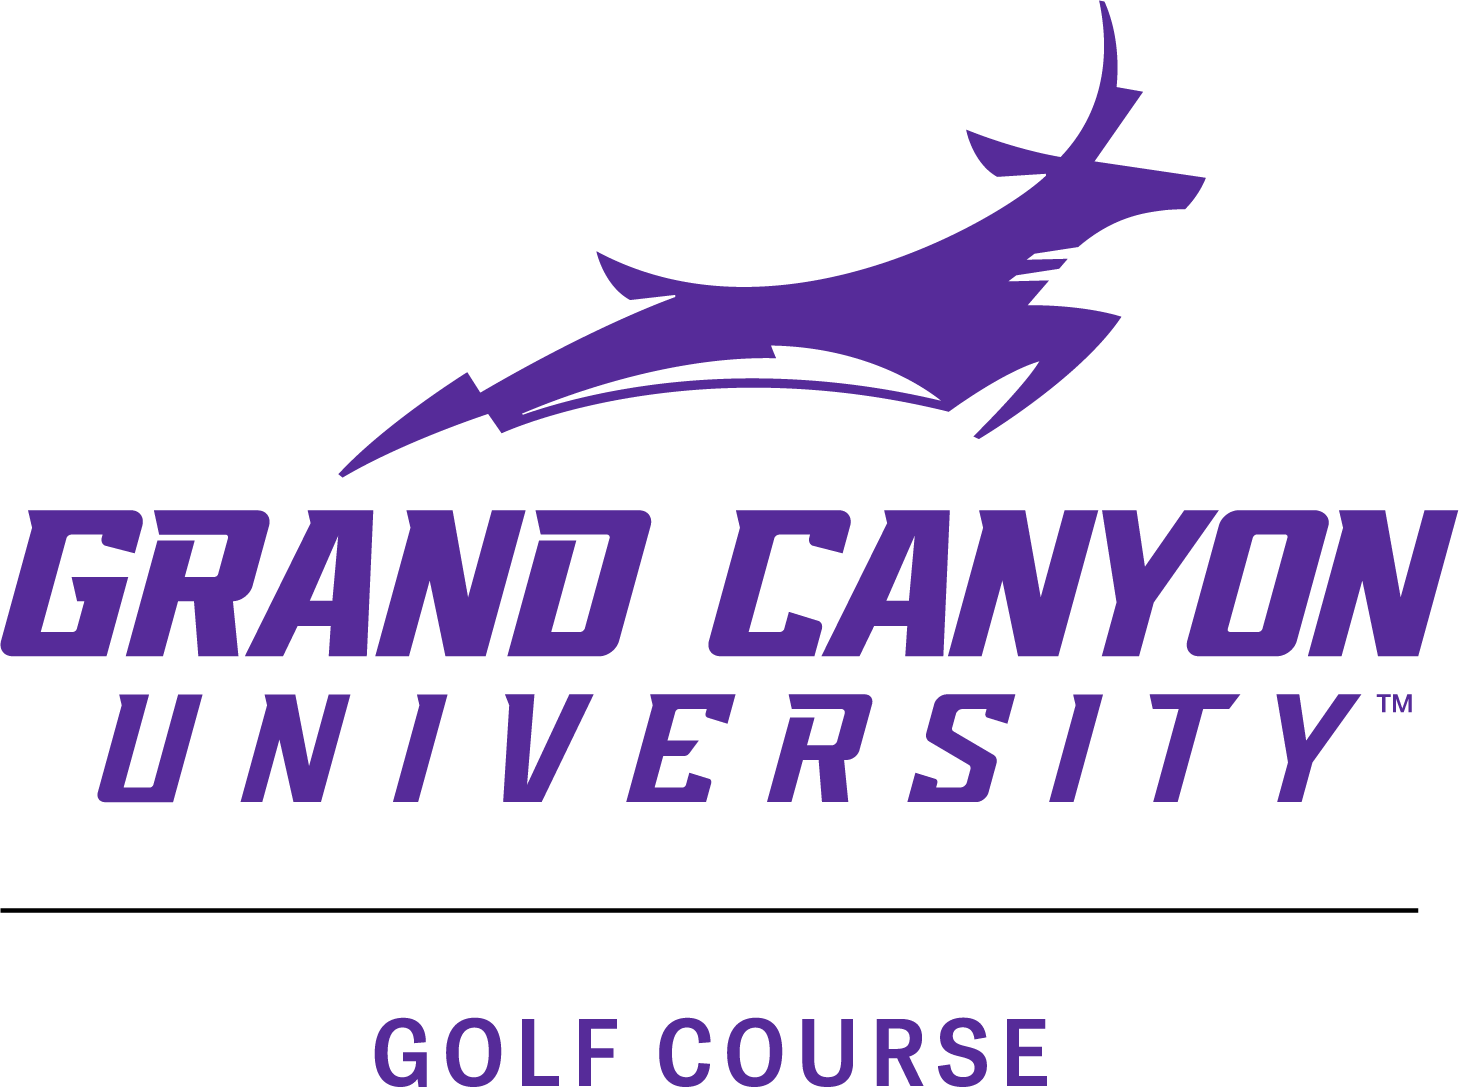 Grand Canyon University Golf Course logo in footer